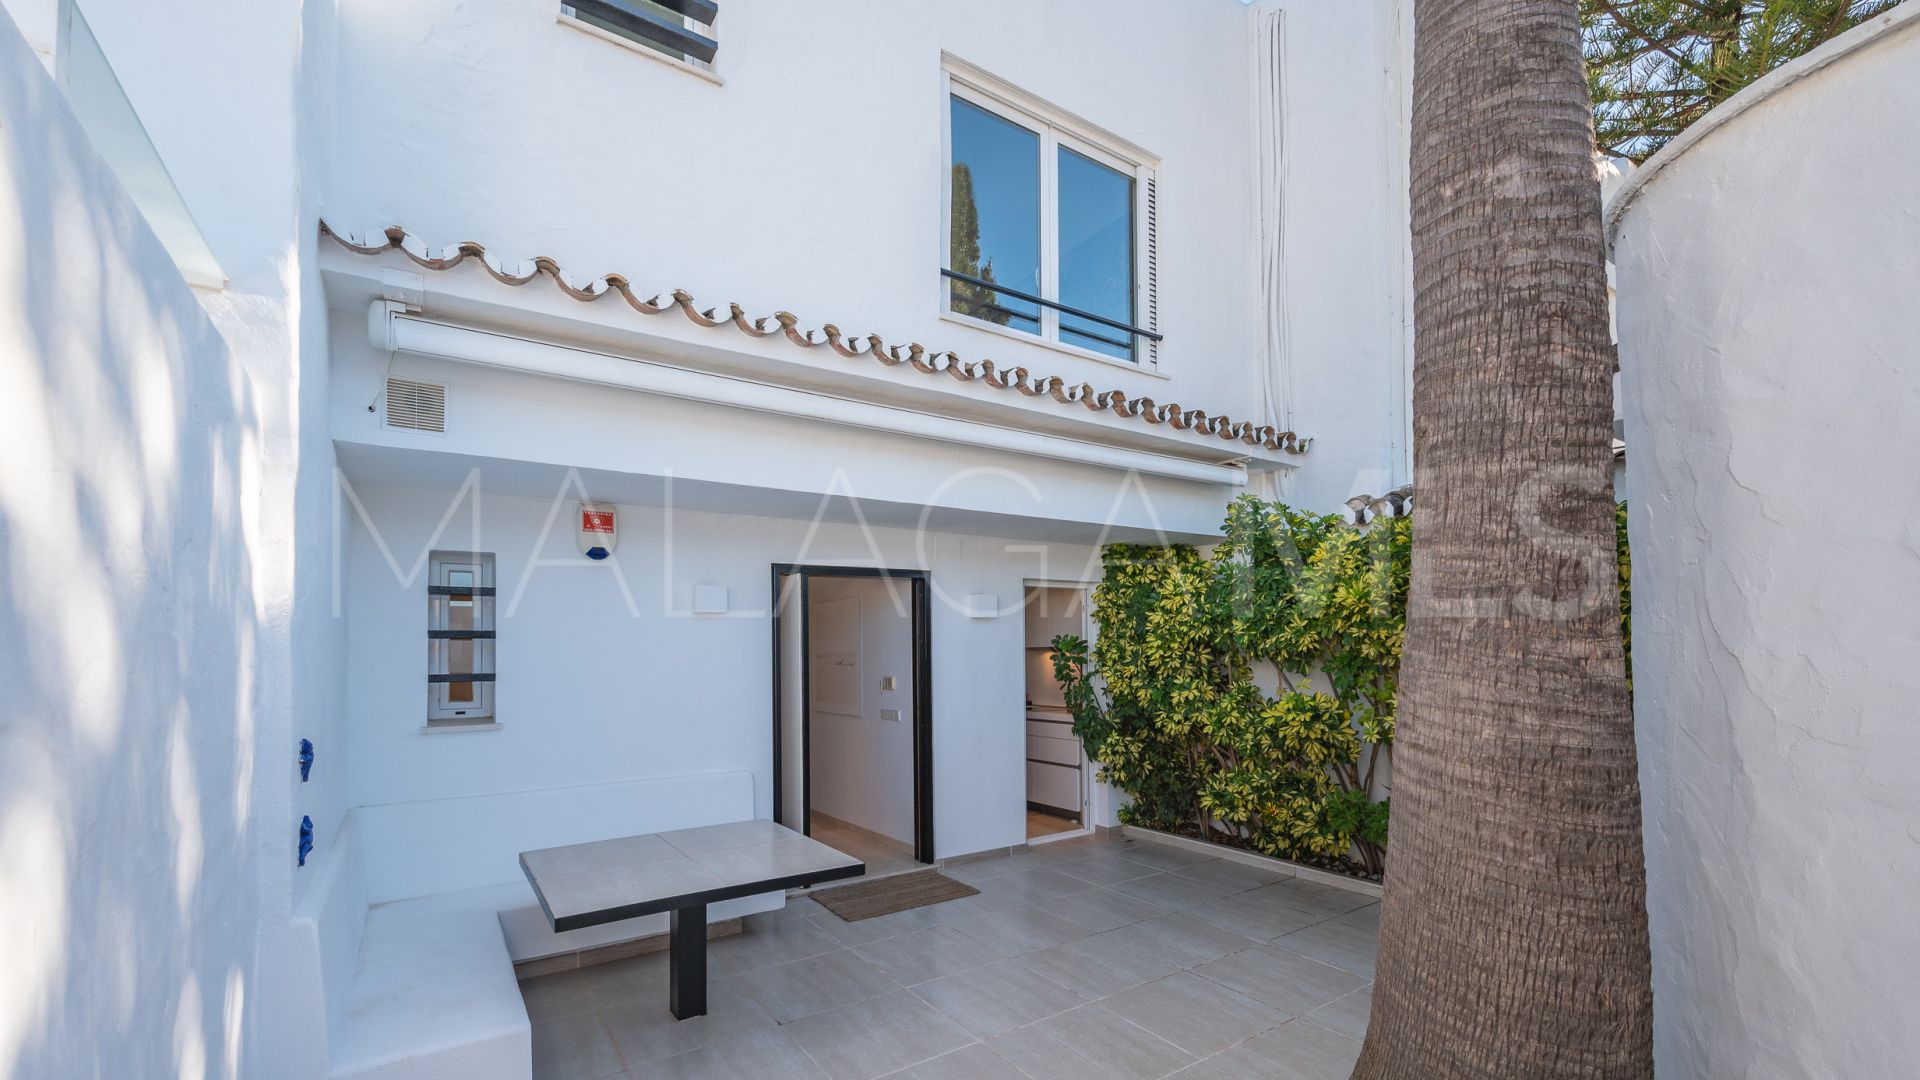 Town house for sale in Peñablanca